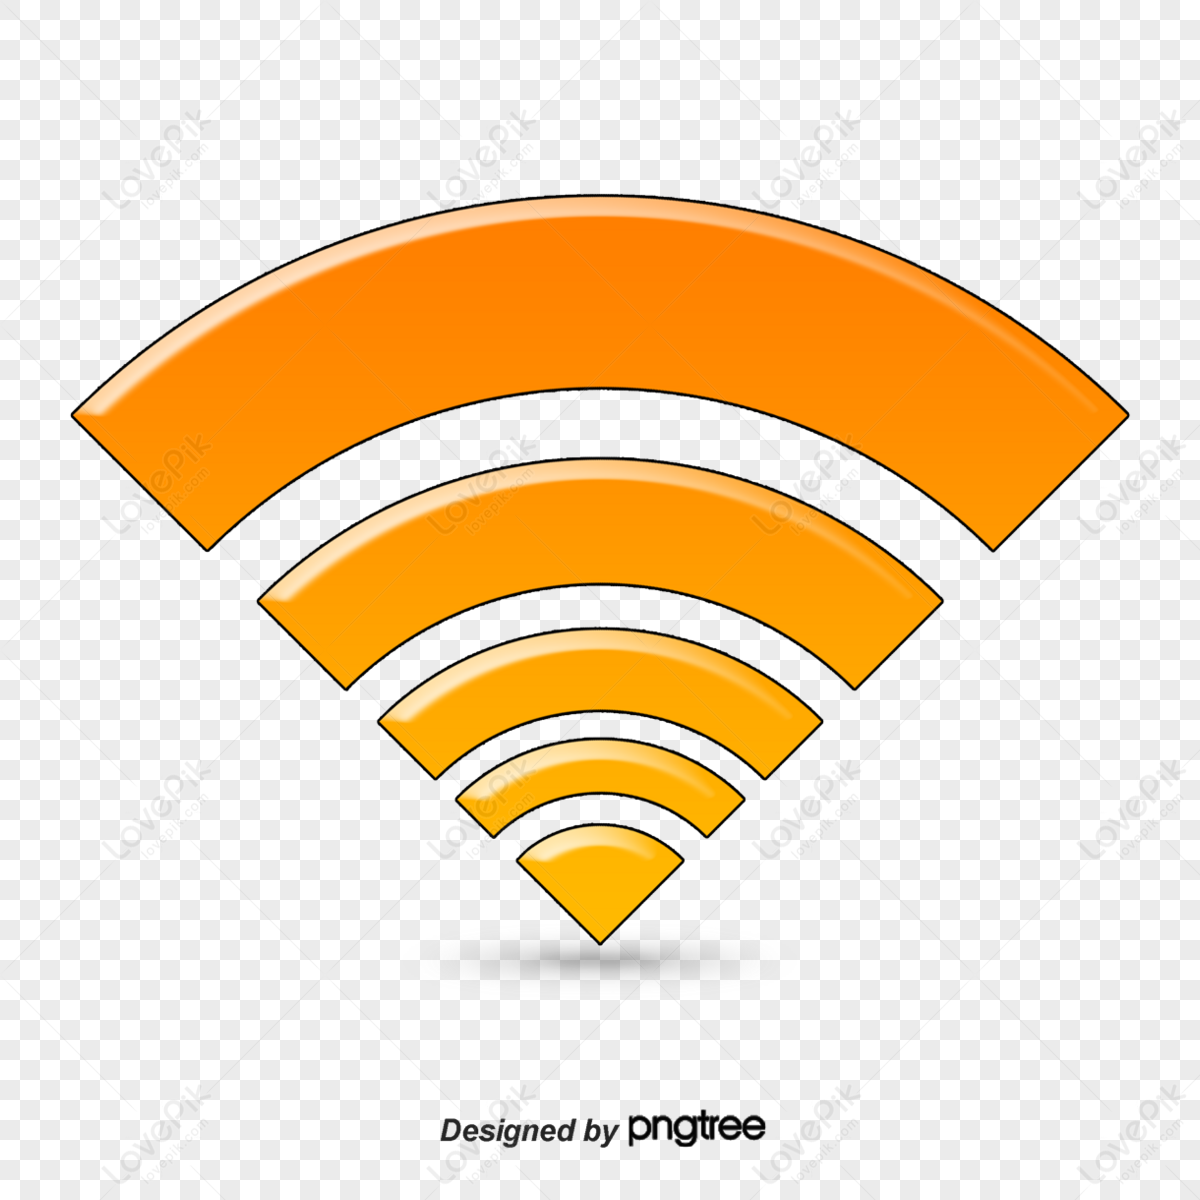 Round Wifi Icon PNG Images, Vectors Free Download - Pngtree